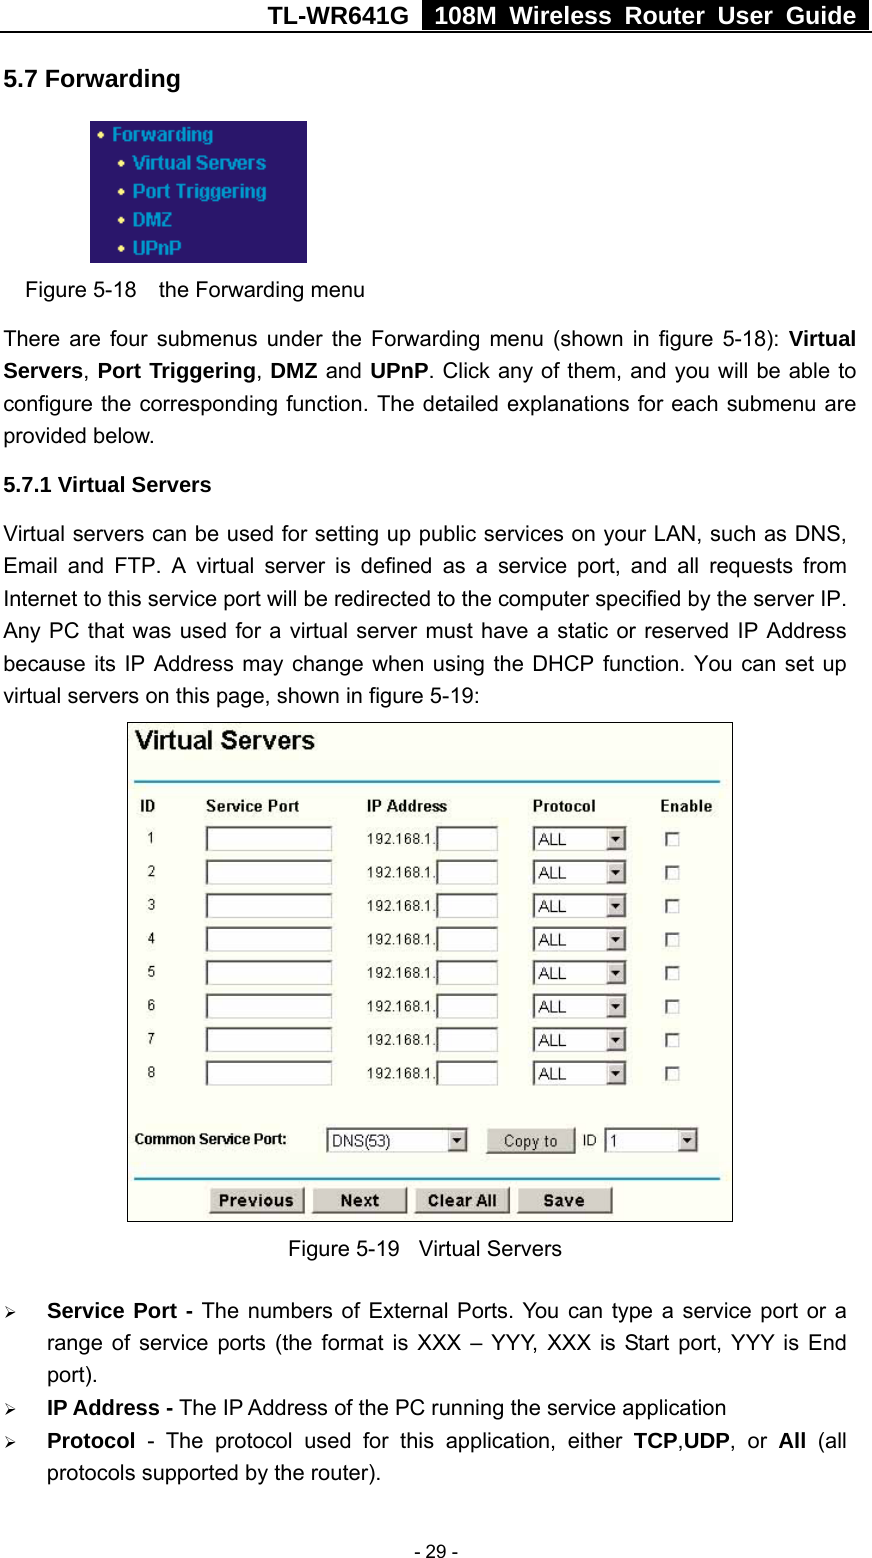 TL-WR641G   108M Wireless Router User Guide   - 29 -5.7 Forwarding     Figure 5-18  the Forwarding menu There are four submenus under the Forwarding menu (shown in figure 5-18): Virtual Servers, Port Triggering, DMZ and UPnP. Click any of them, and you will be able to configure the corresponding function. The detailed explanations for each submenu are provided below. 5.7.1 Virtual Servers Virtual servers can be used for setting up public services on your LAN, such as DNS, Email and FTP. A virtual server is defined as a service port, and all requests from Internet to this service port will be redirected to the computer specified by the server IP. Any PC that was used for a virtual server must have a static or reserved IP Address because its IP Address may change when using the DHCP function. You can set up virtual servers on this page, shown in figure 5-19:  Figure 5-19  Virtual Servers ¾ Service Port - The numbers of External Ports. You can type a service port or a range of service ports (the format is XXX – YYY, XXX is Start port, YYY is End port).  ¾ IP Address - The IP Address of the PC running the service application ¾ Protocol - The protocol used for this application, either TCP,UDP, or All  (all protocols supported by the router). 